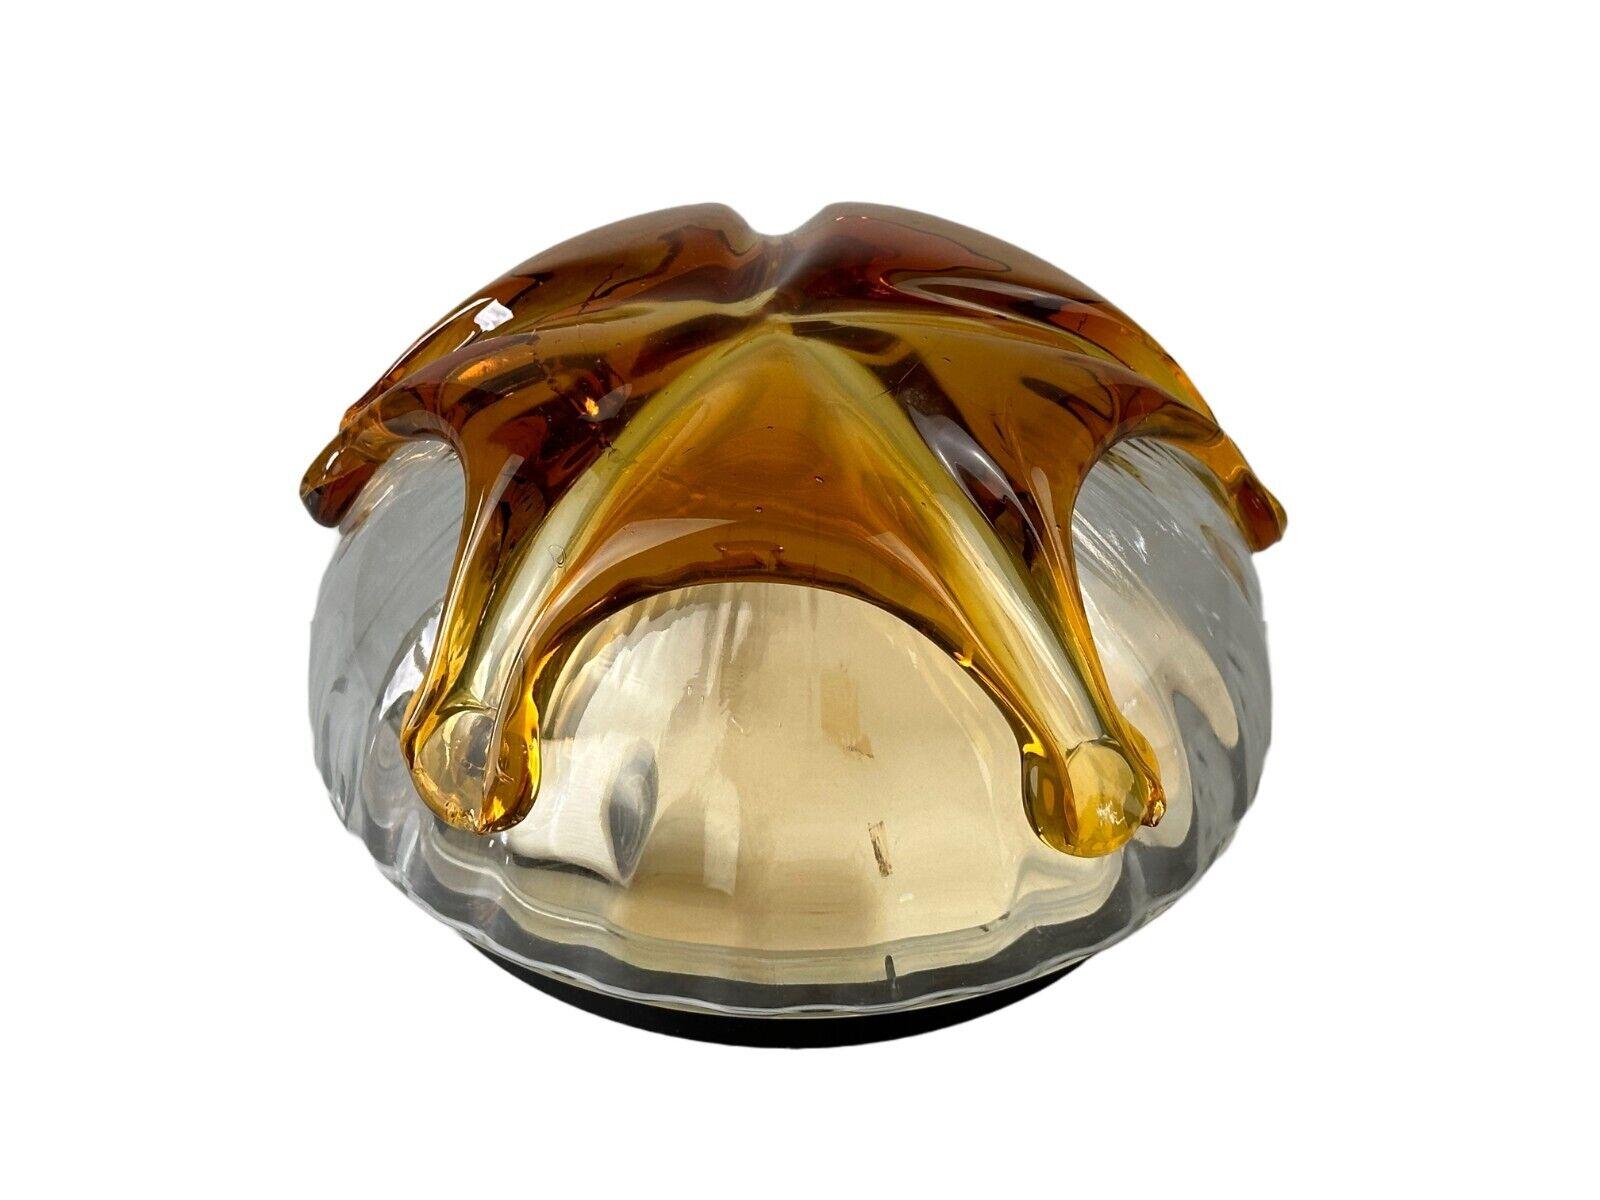 60s 70s Brutalist Ceiling Lamp Flush Mount Murano Glass Space Age Design

Object: ceiling lamp

Manufacturer:

Condition: good

Age: around 1960-1970

Dimensions:

Diameter = 31cm
Height = 17cm

Other notes:

2x E27 socket

The pictures serve as